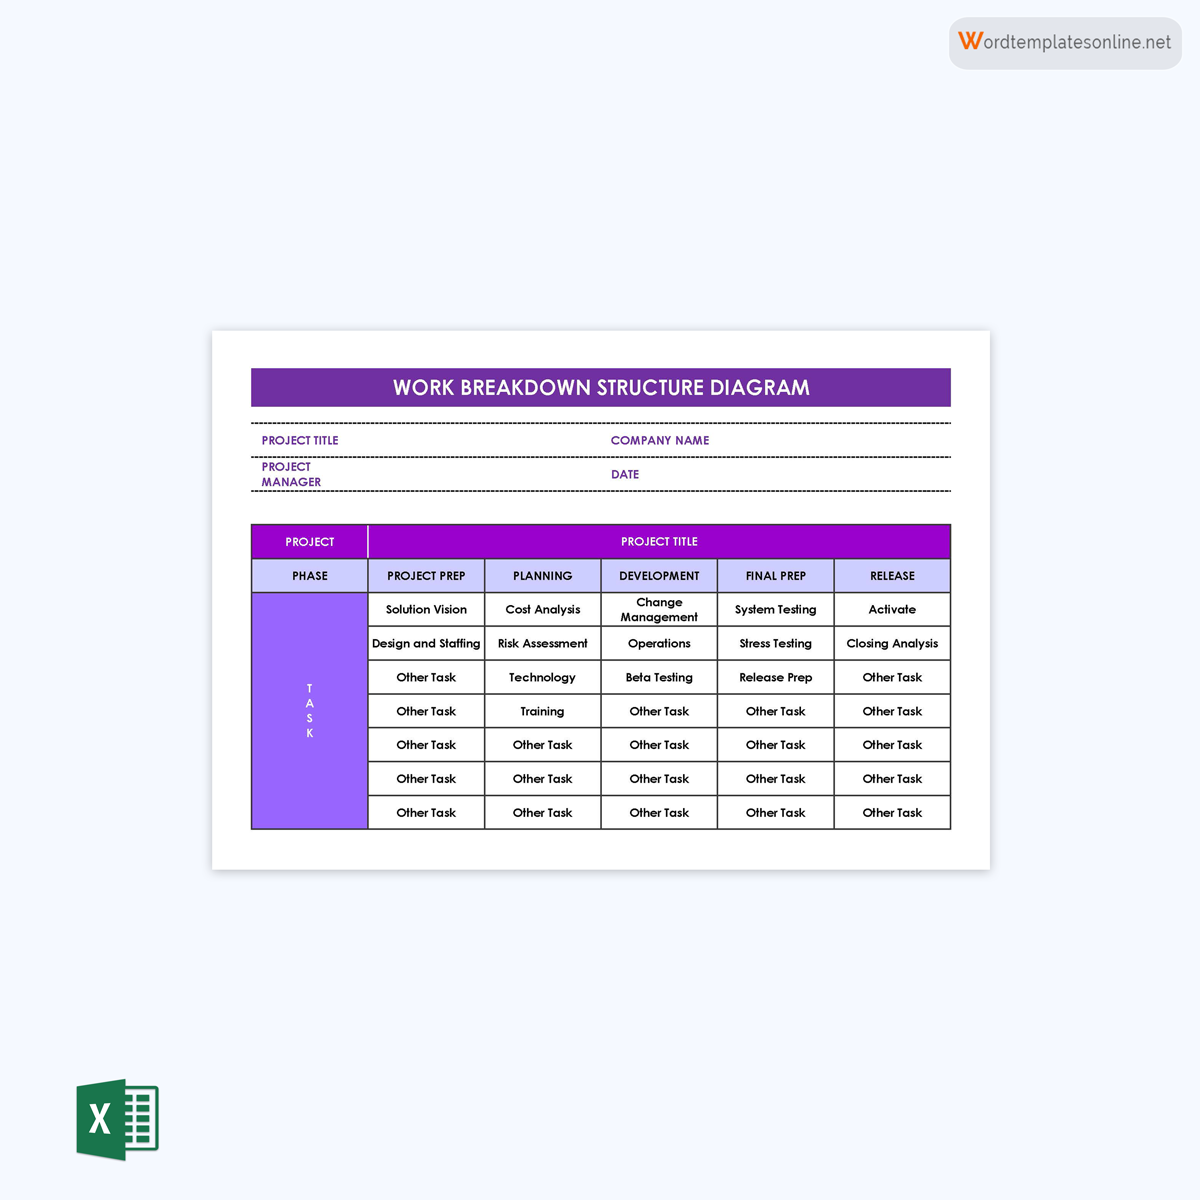 Free Printable Work Breakdown Structure Diagram Template 02 for Excel Sheet